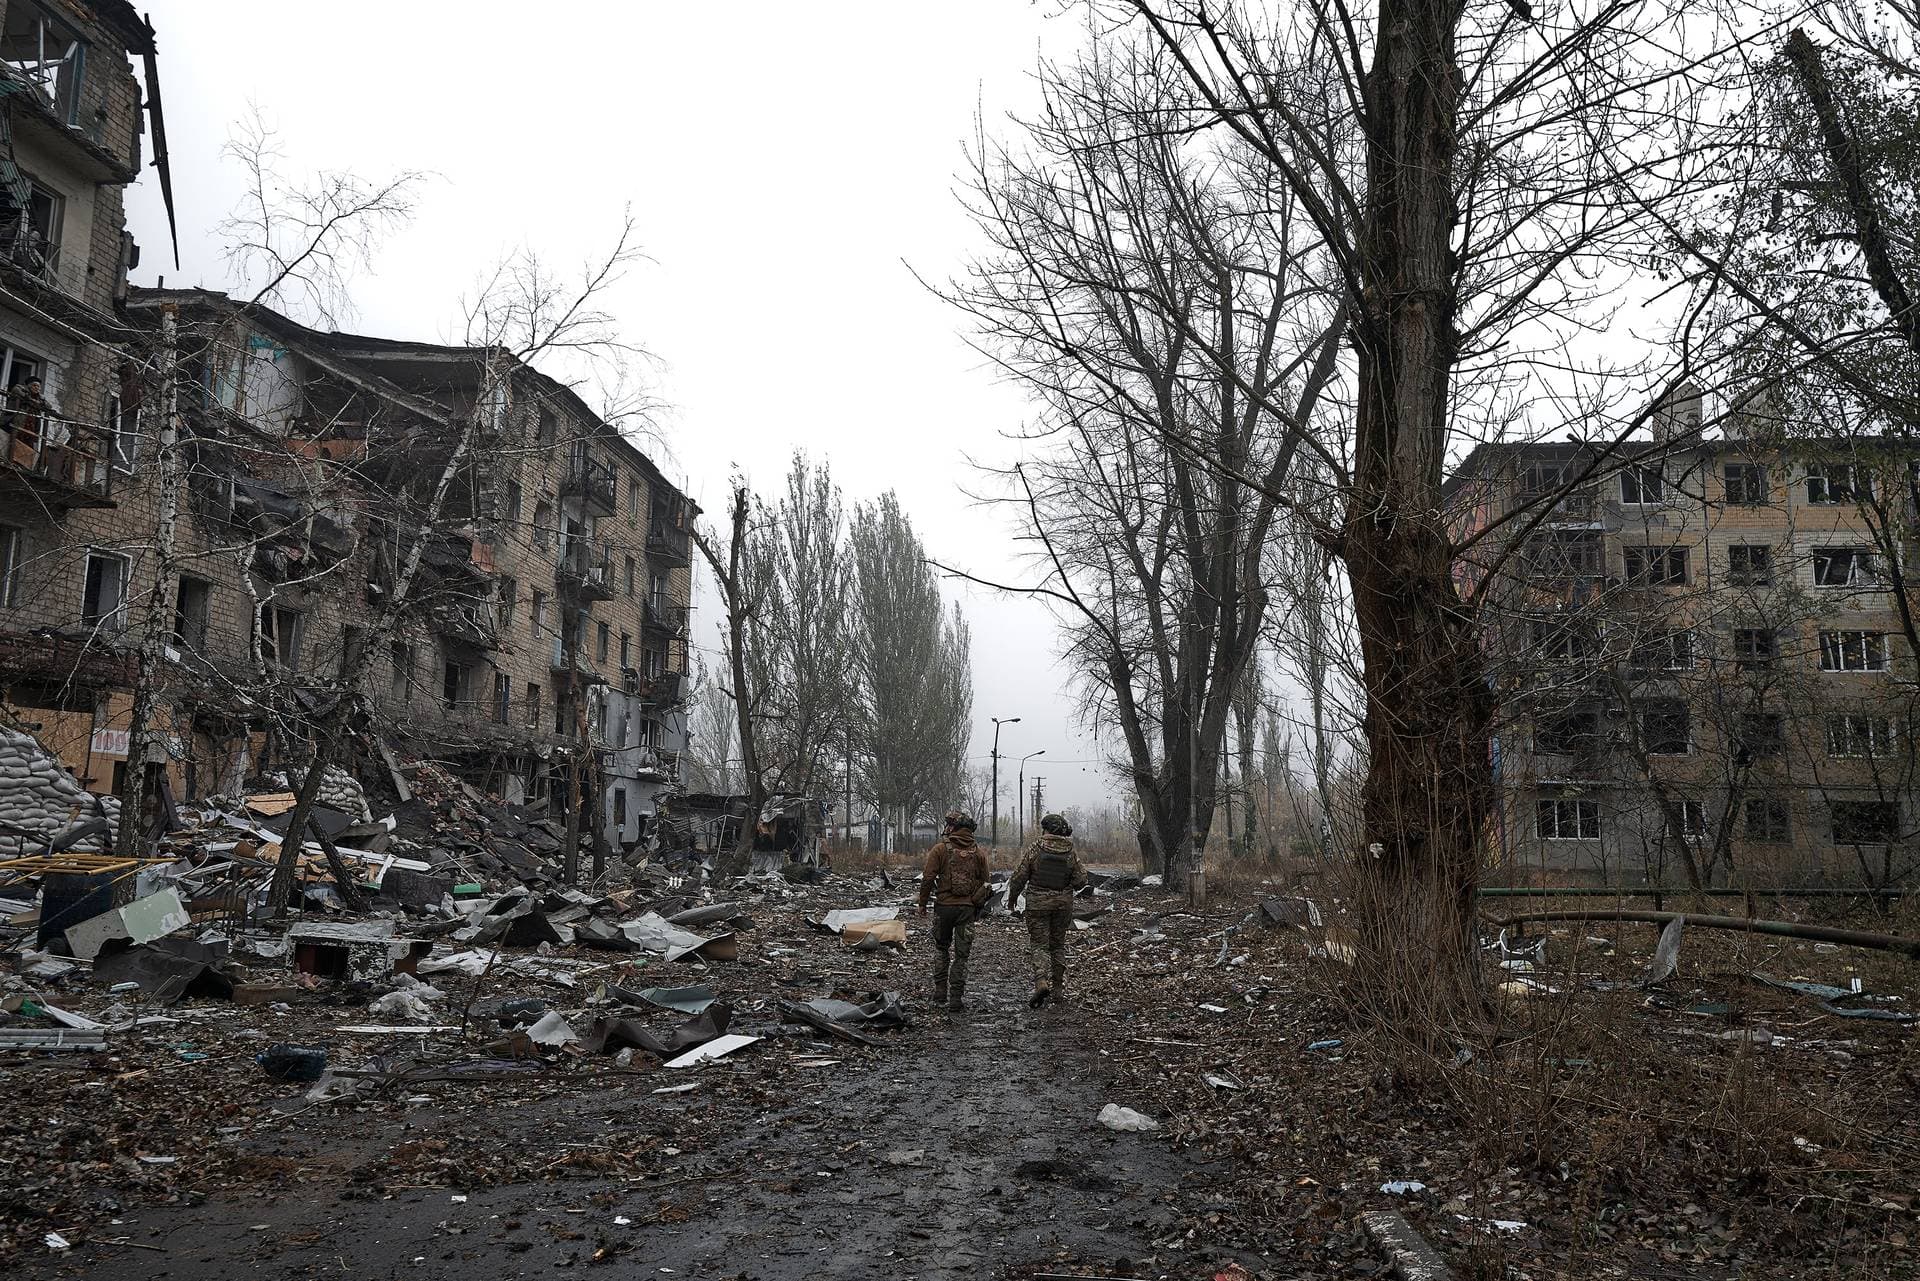 Two Ukrainian soldiers walk along the destroyed city in the fog in Avdiivka